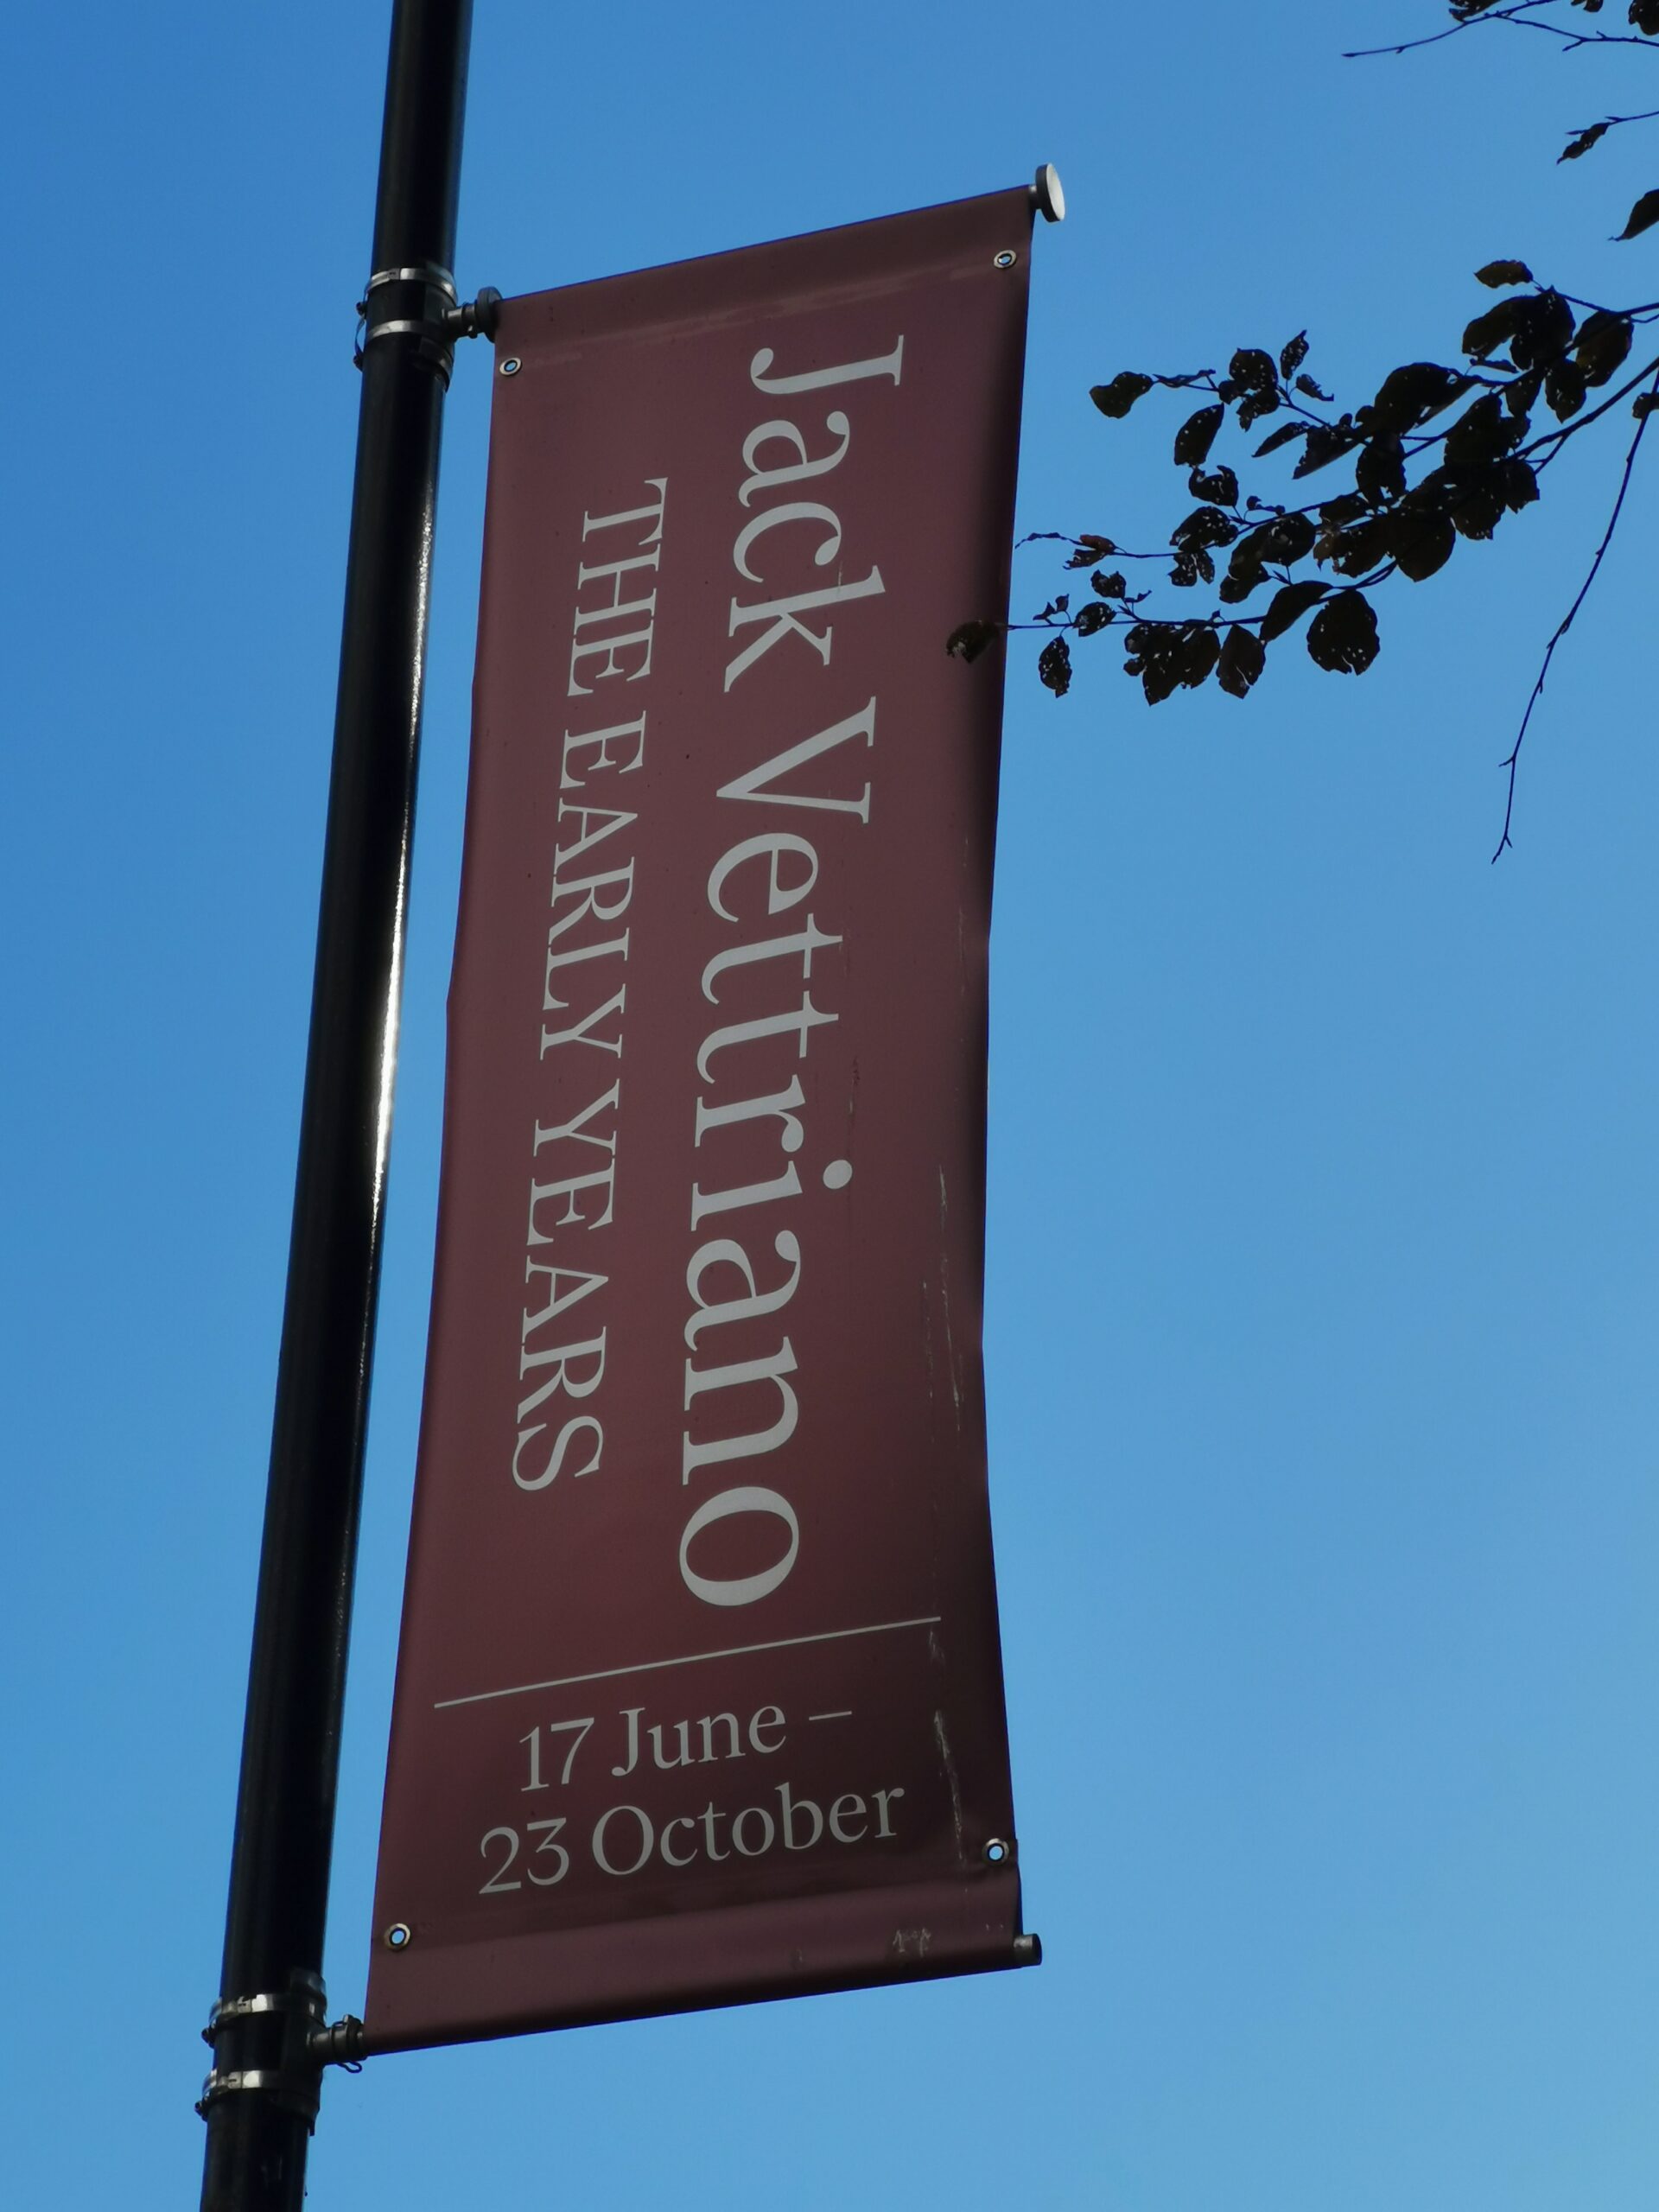 The Kirkcaldy Adventure – Jack Vettriano – The Early Years Exhibition